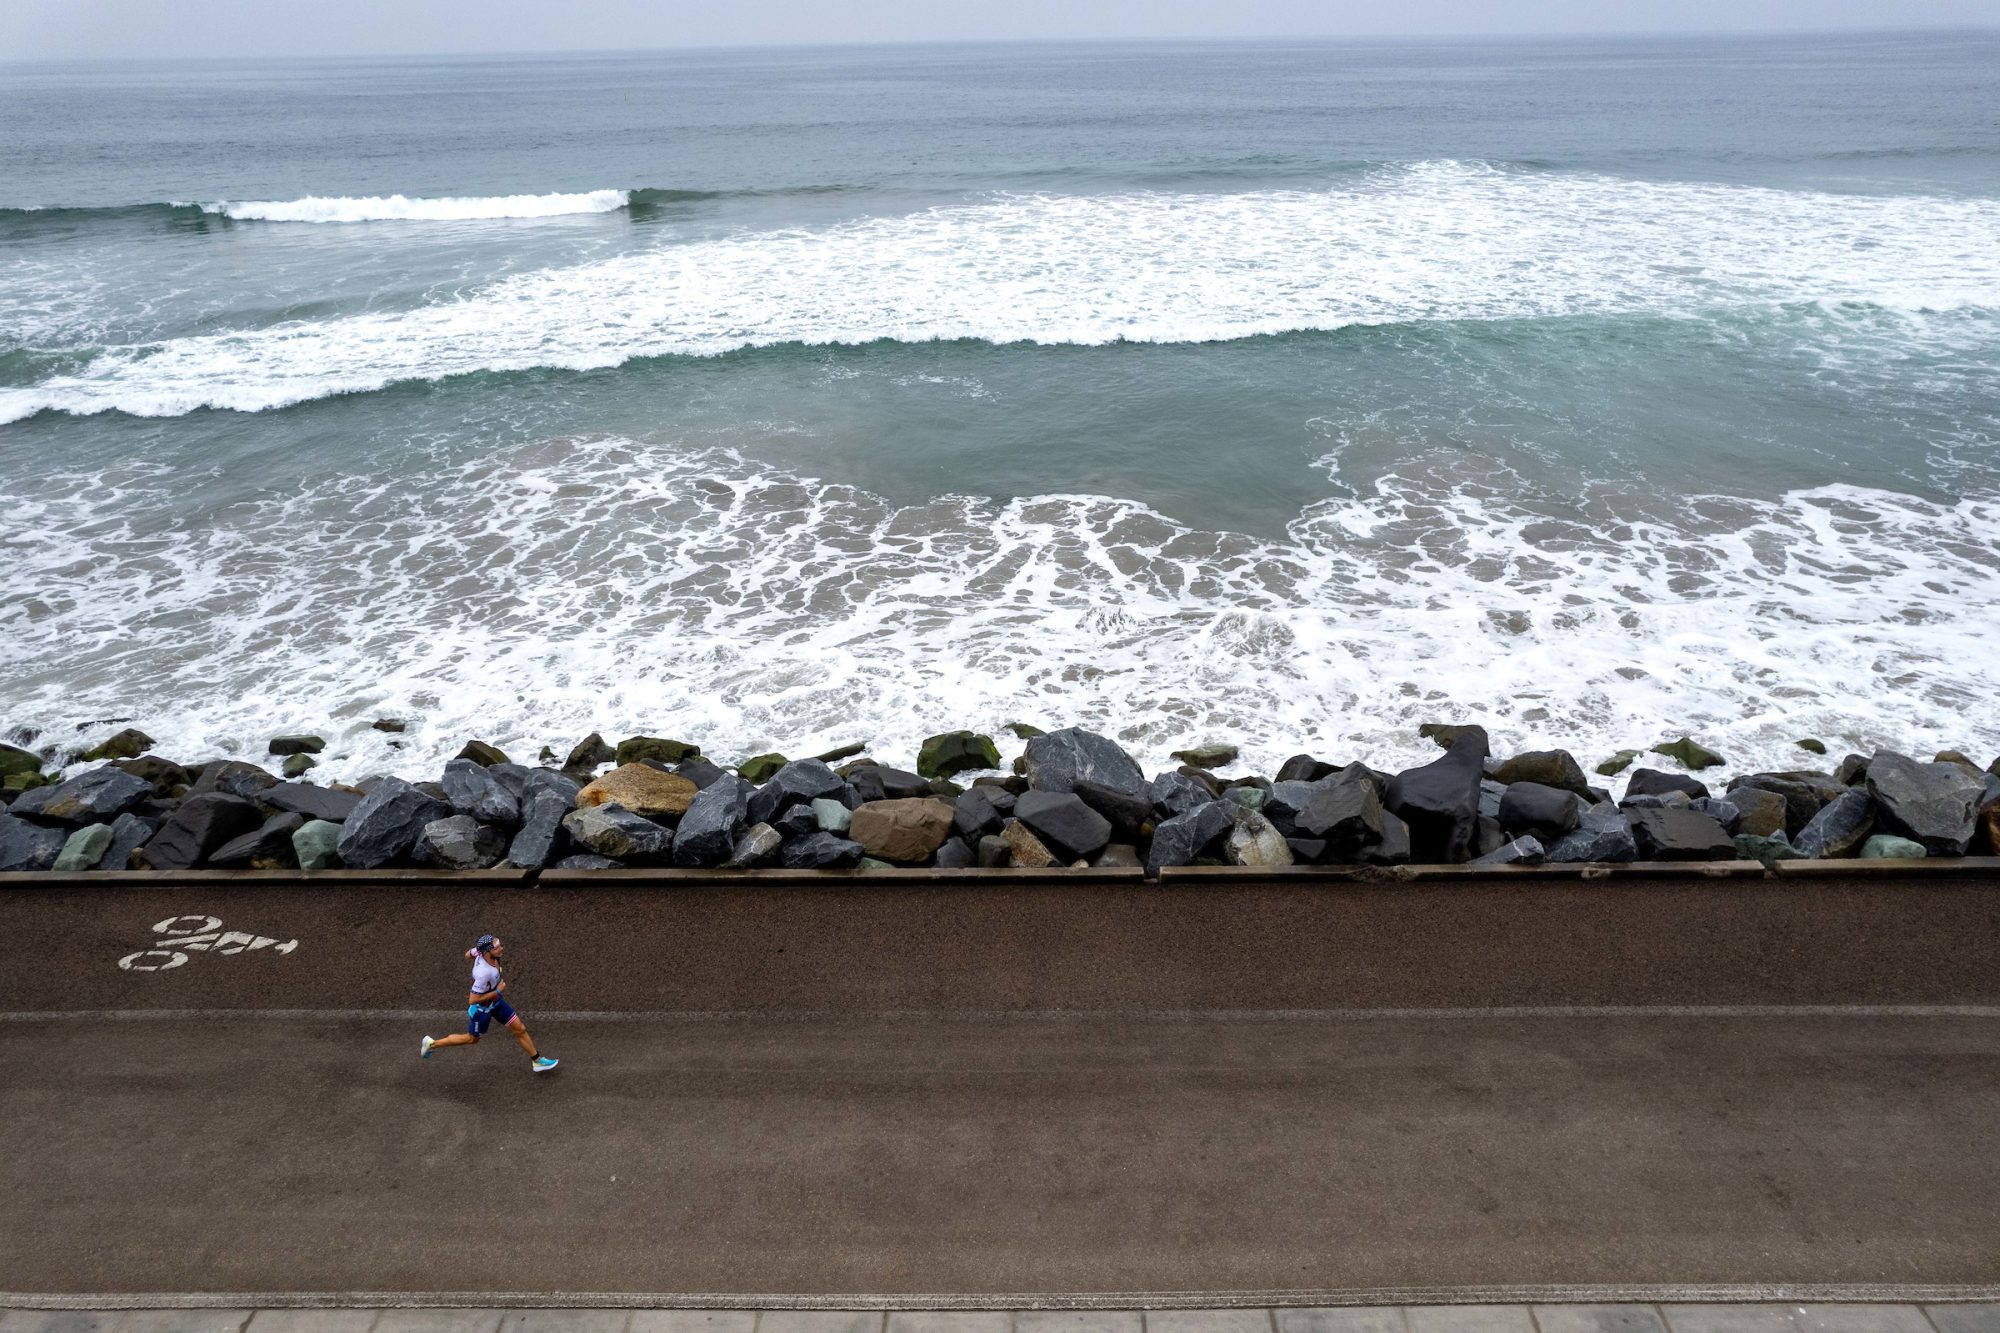 Where to stay for ironman oceanside